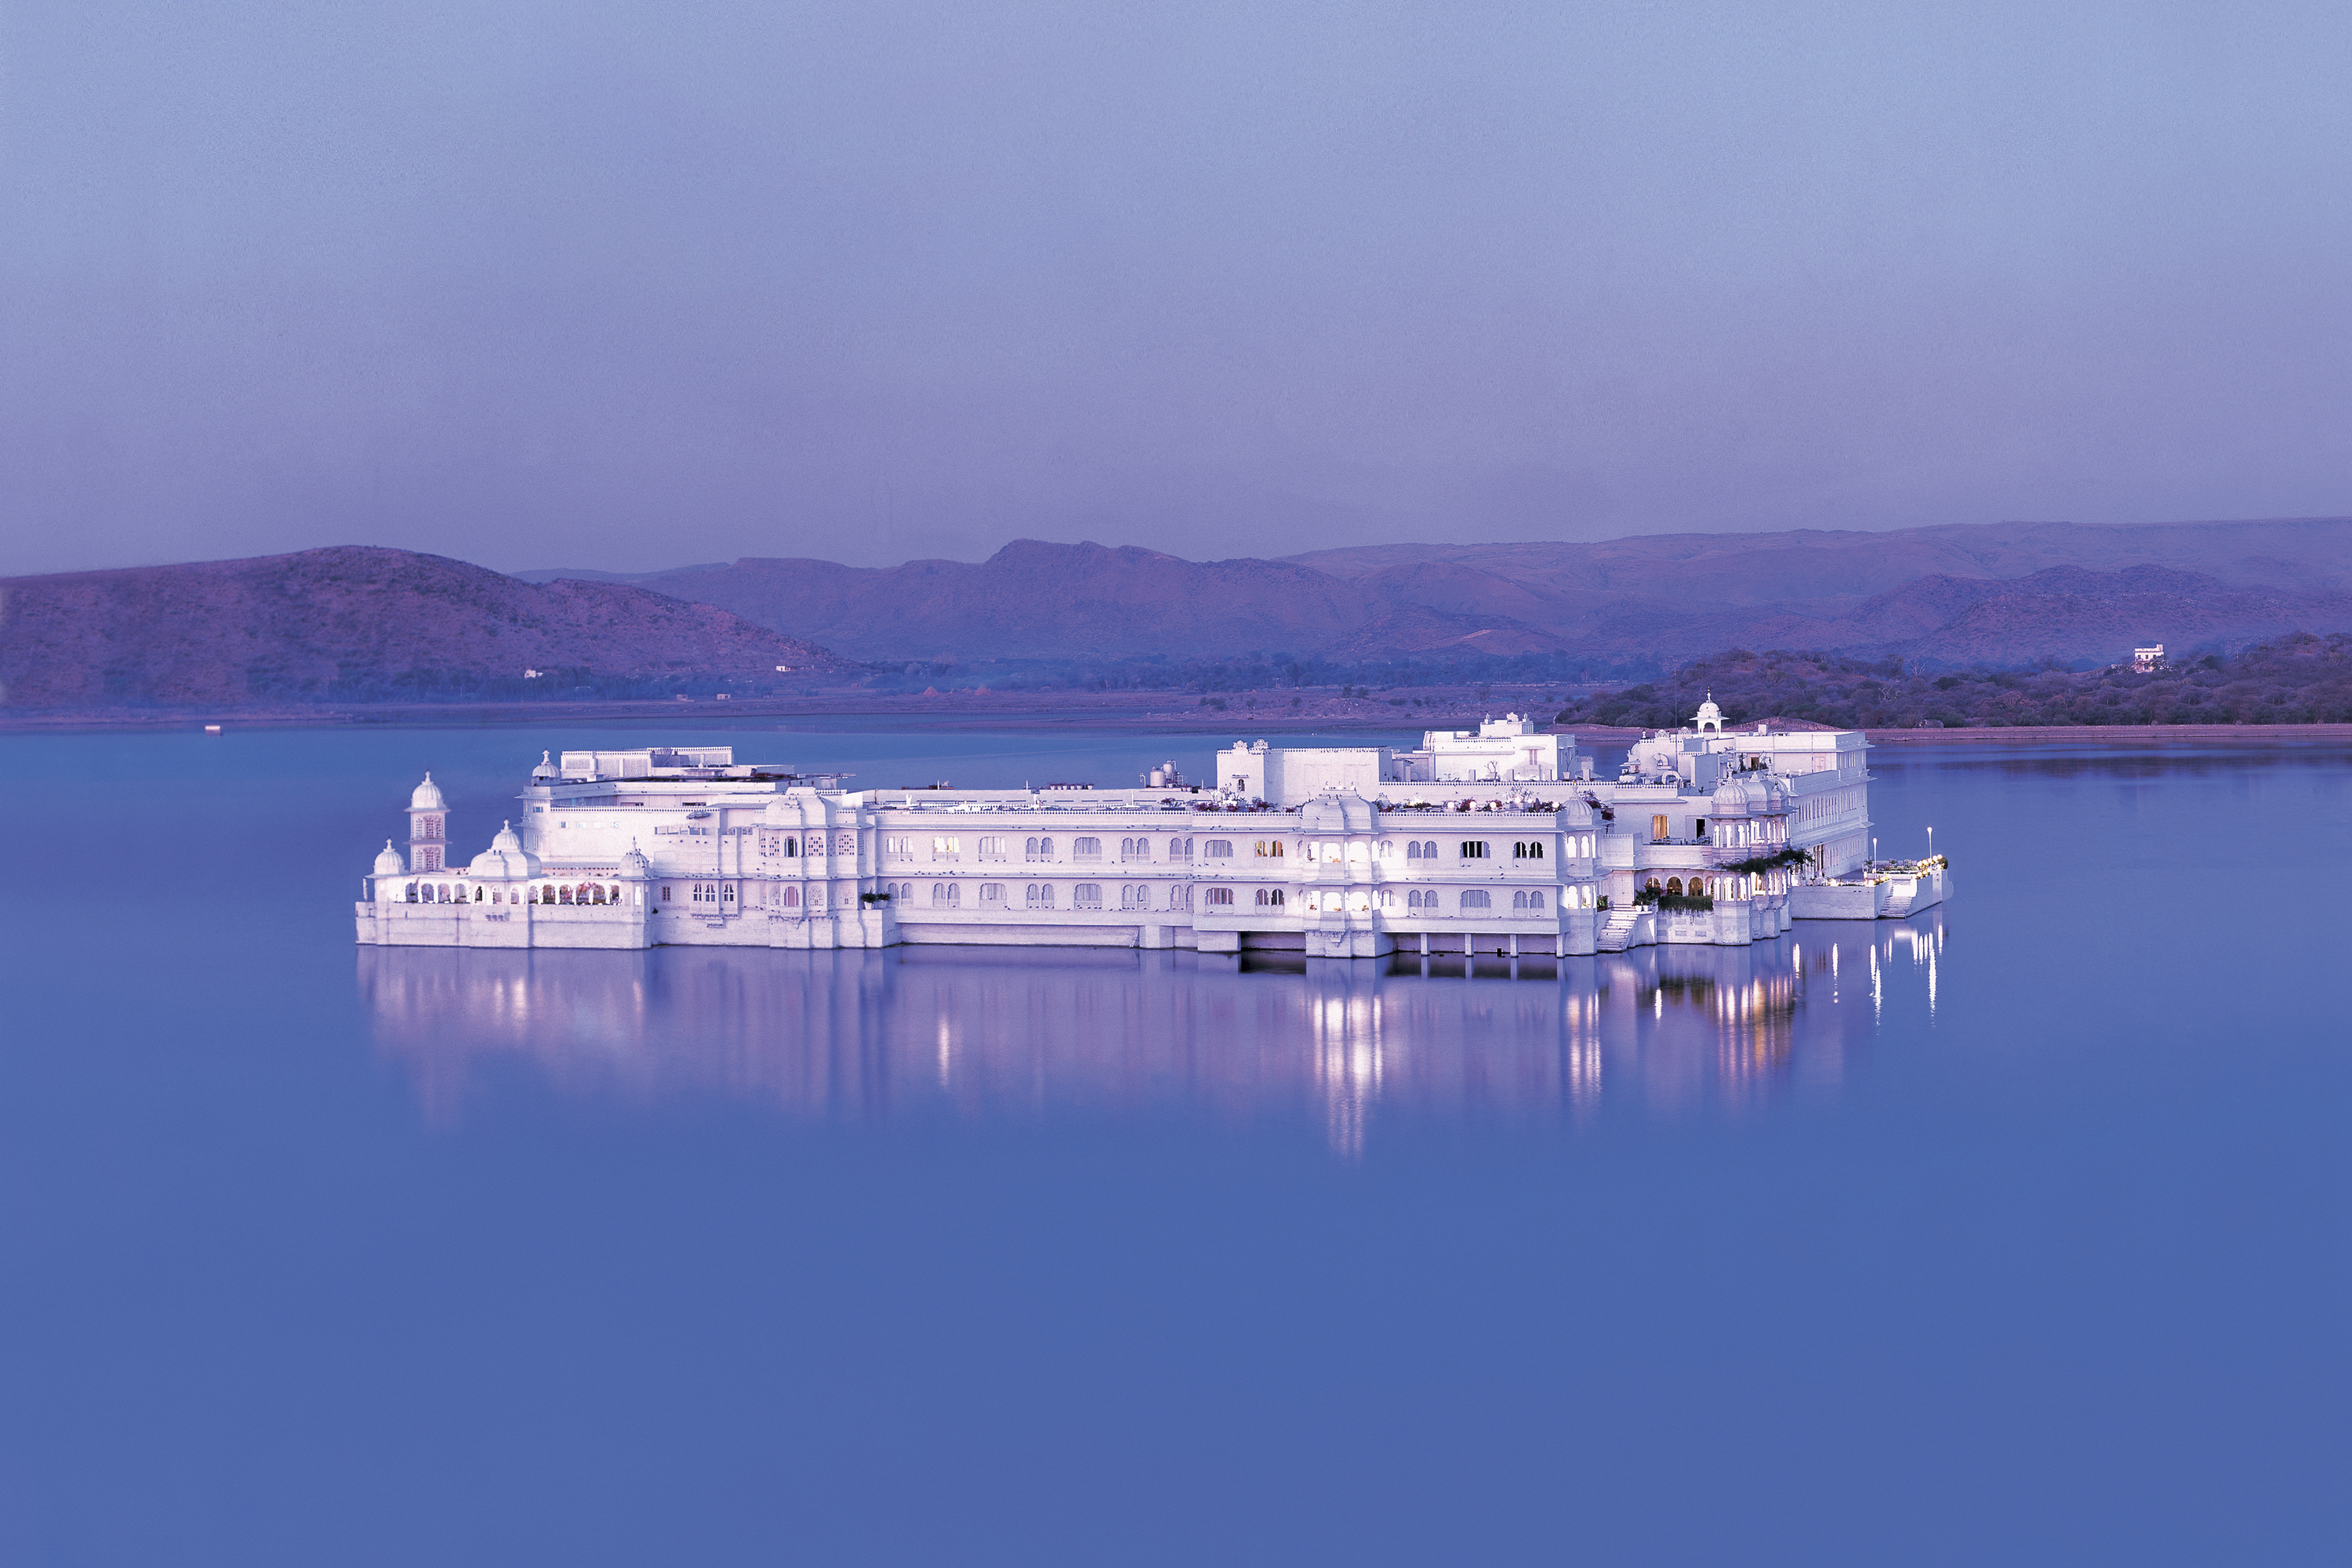 Amazing Udaipur Hotel Pictures & Backgrounds